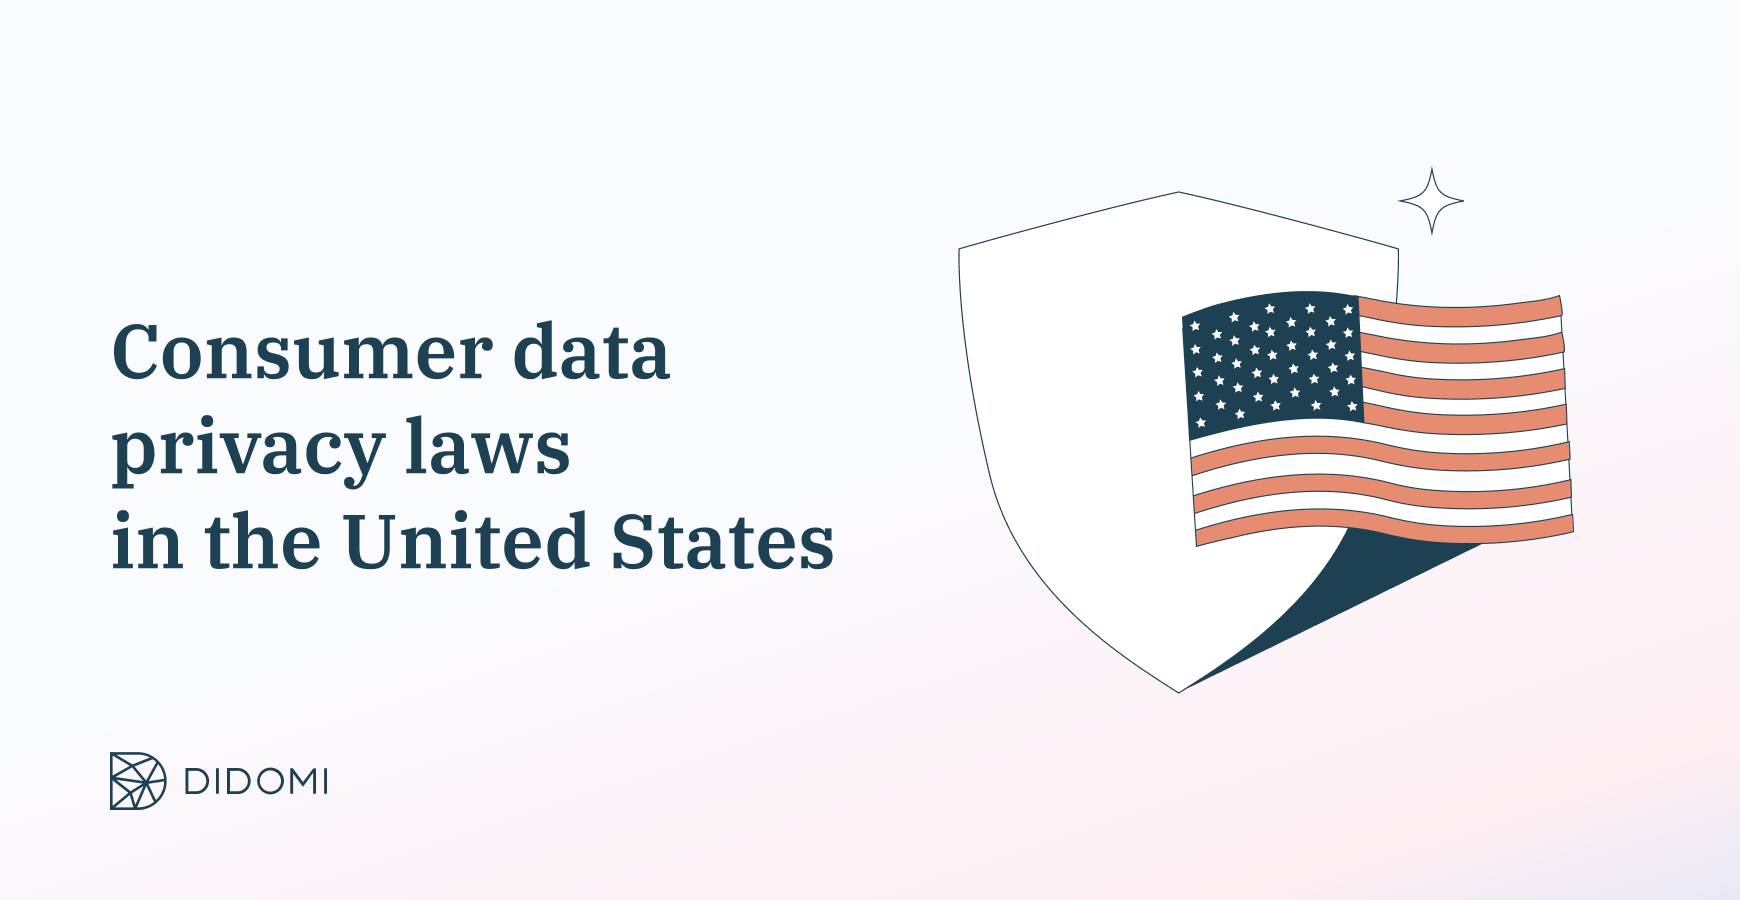 Data privacy laws in the United States